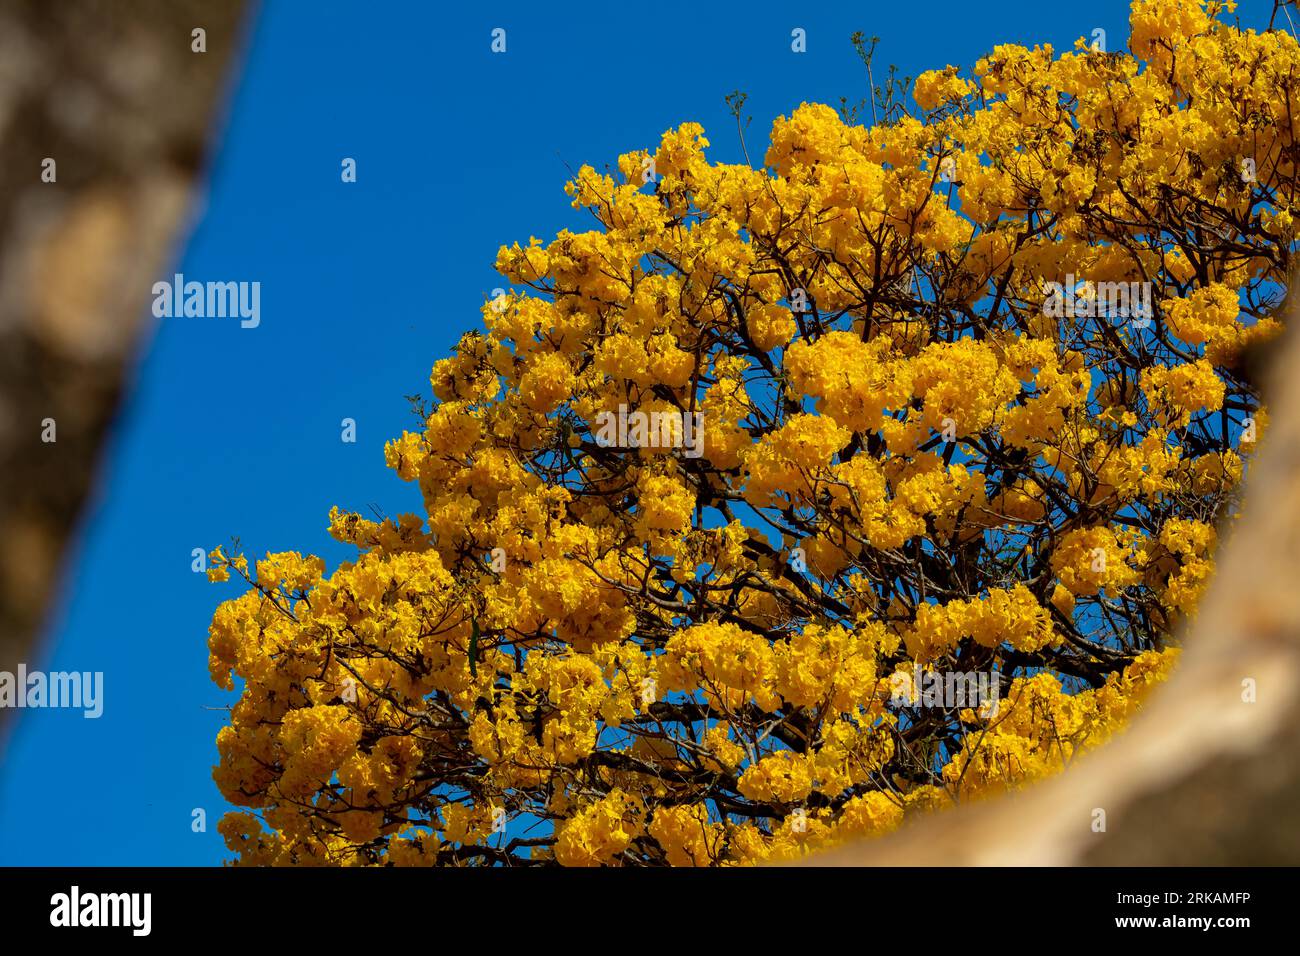 Natural Blooming Golden Trumpet Tree (in Portuguese: Ipe Amarelo; scientific name: Tabebuia chrysotricha or Handroantus chrysotrichus). Stock Photo